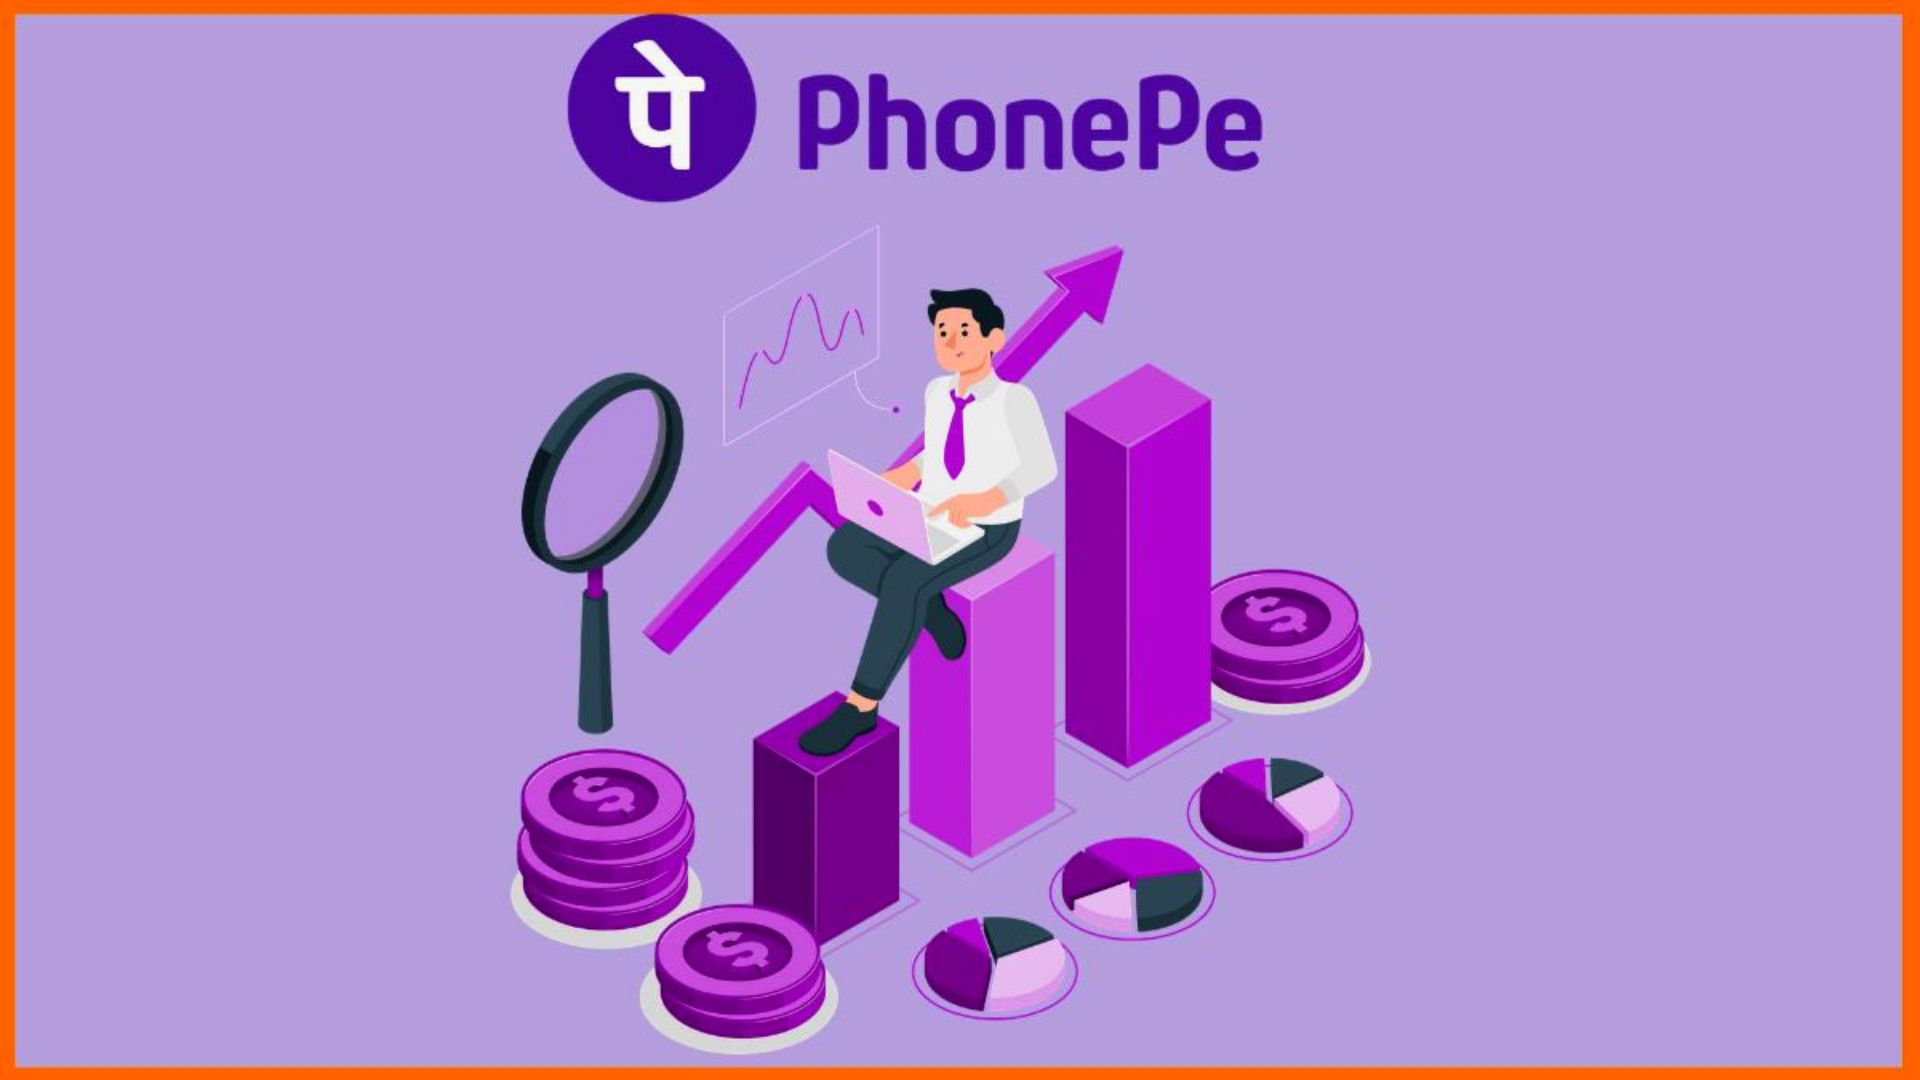 How To Check UPI ID In Phonepe In 7 Simple Steps?